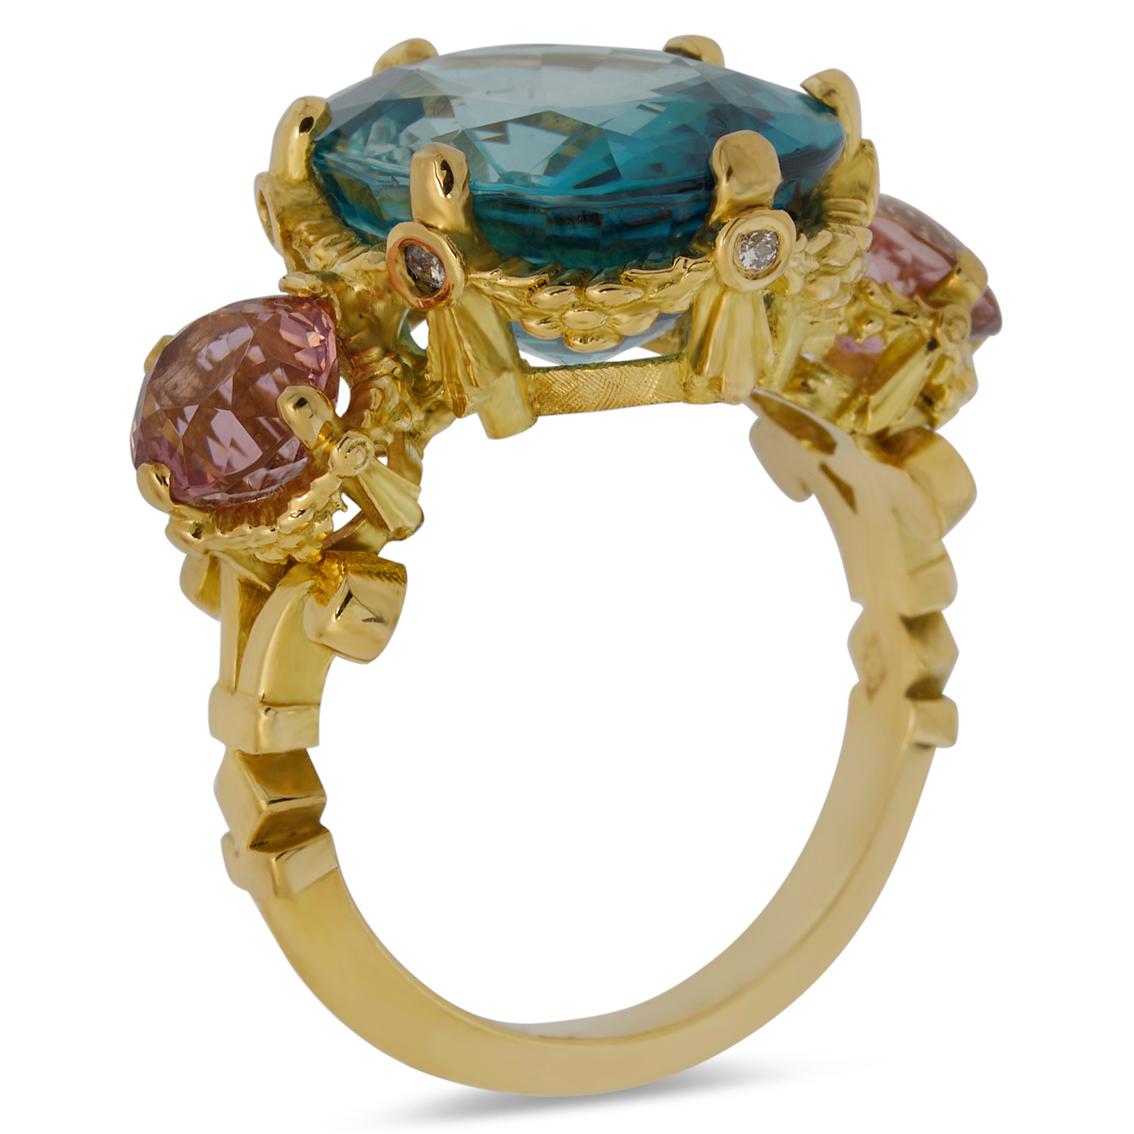 Intricately handcrafted in 18kt yellow gold this exquisite ring features a breathtaking sky blue oval cut zircon aloft a signature William Llewellyn Griffiths garland setting studded with six round brilliant cut white diamonds. Measuring 16mm long x